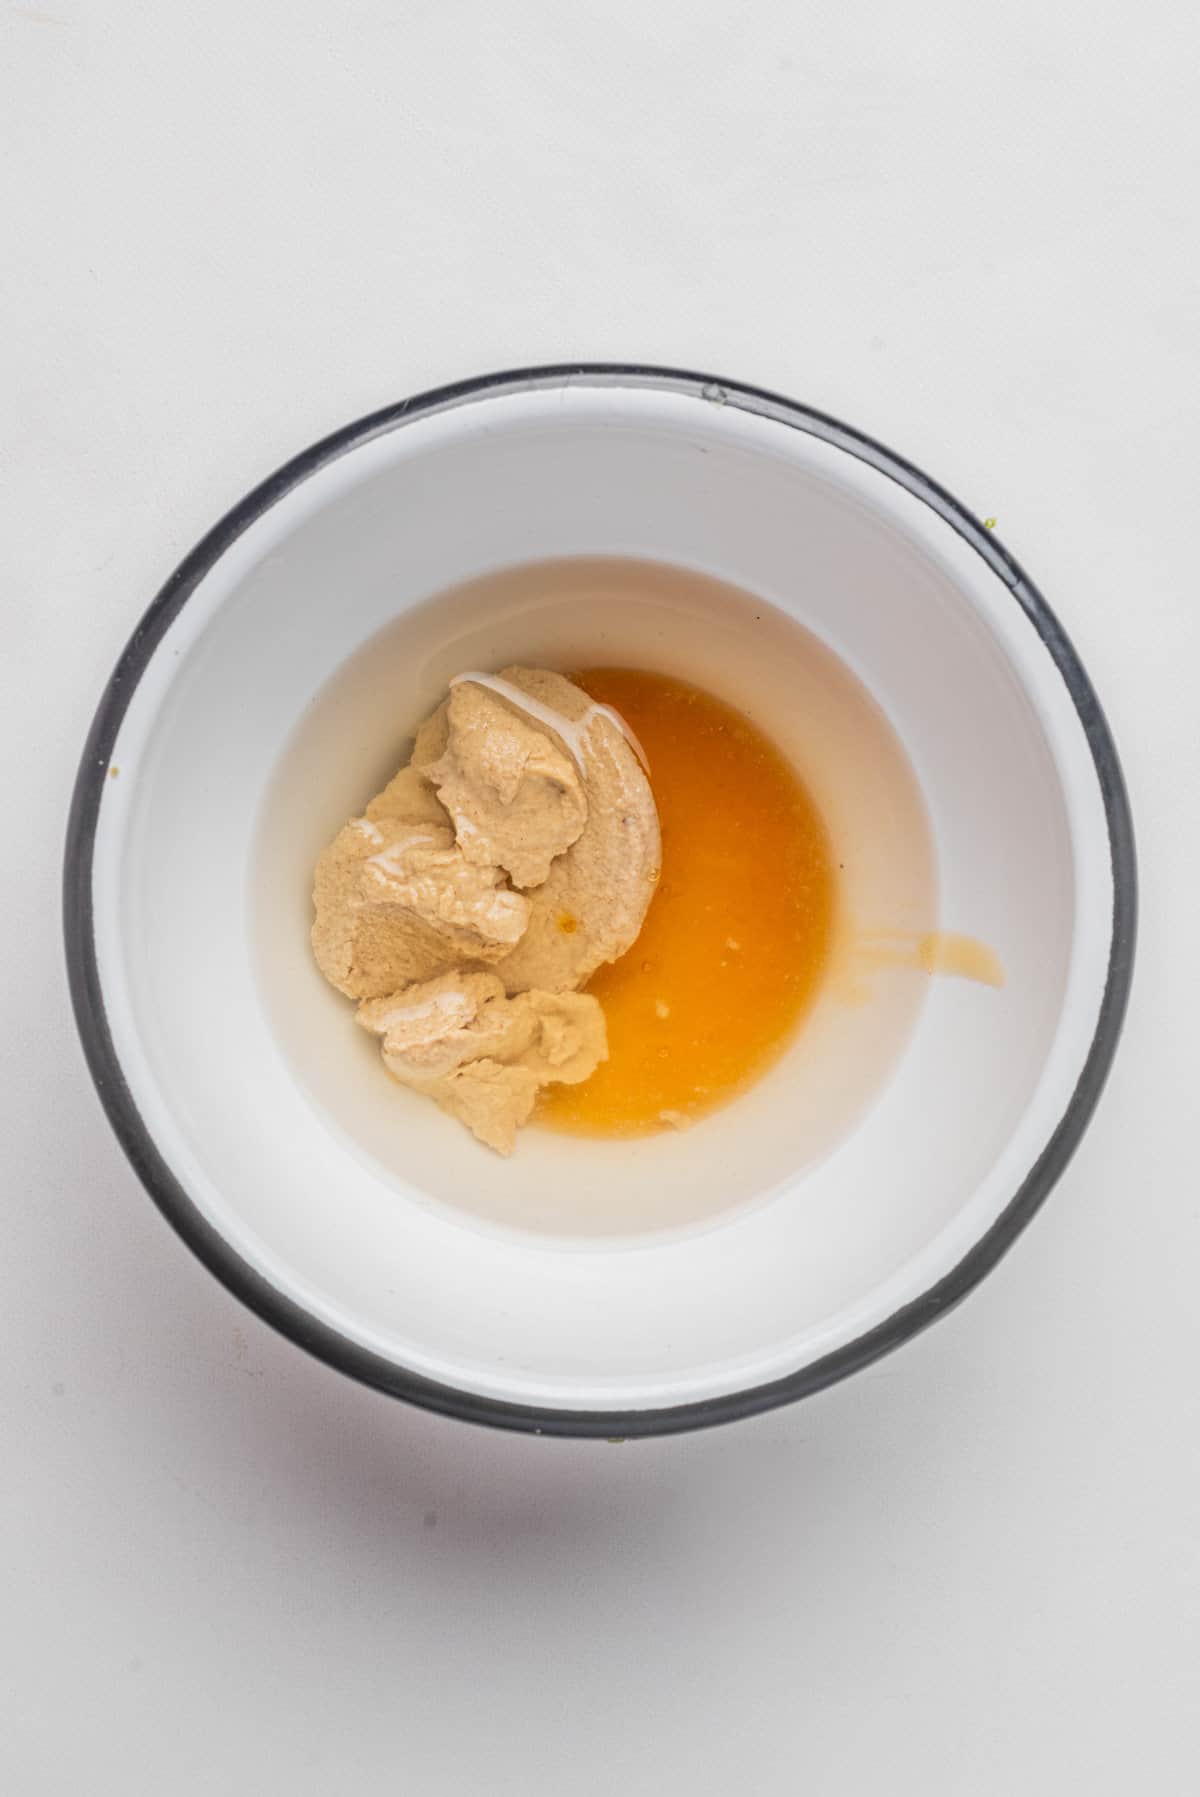 An image of champagne vinegar, Dijon mustard, and honey or maple syrup in a small mixing bowl.